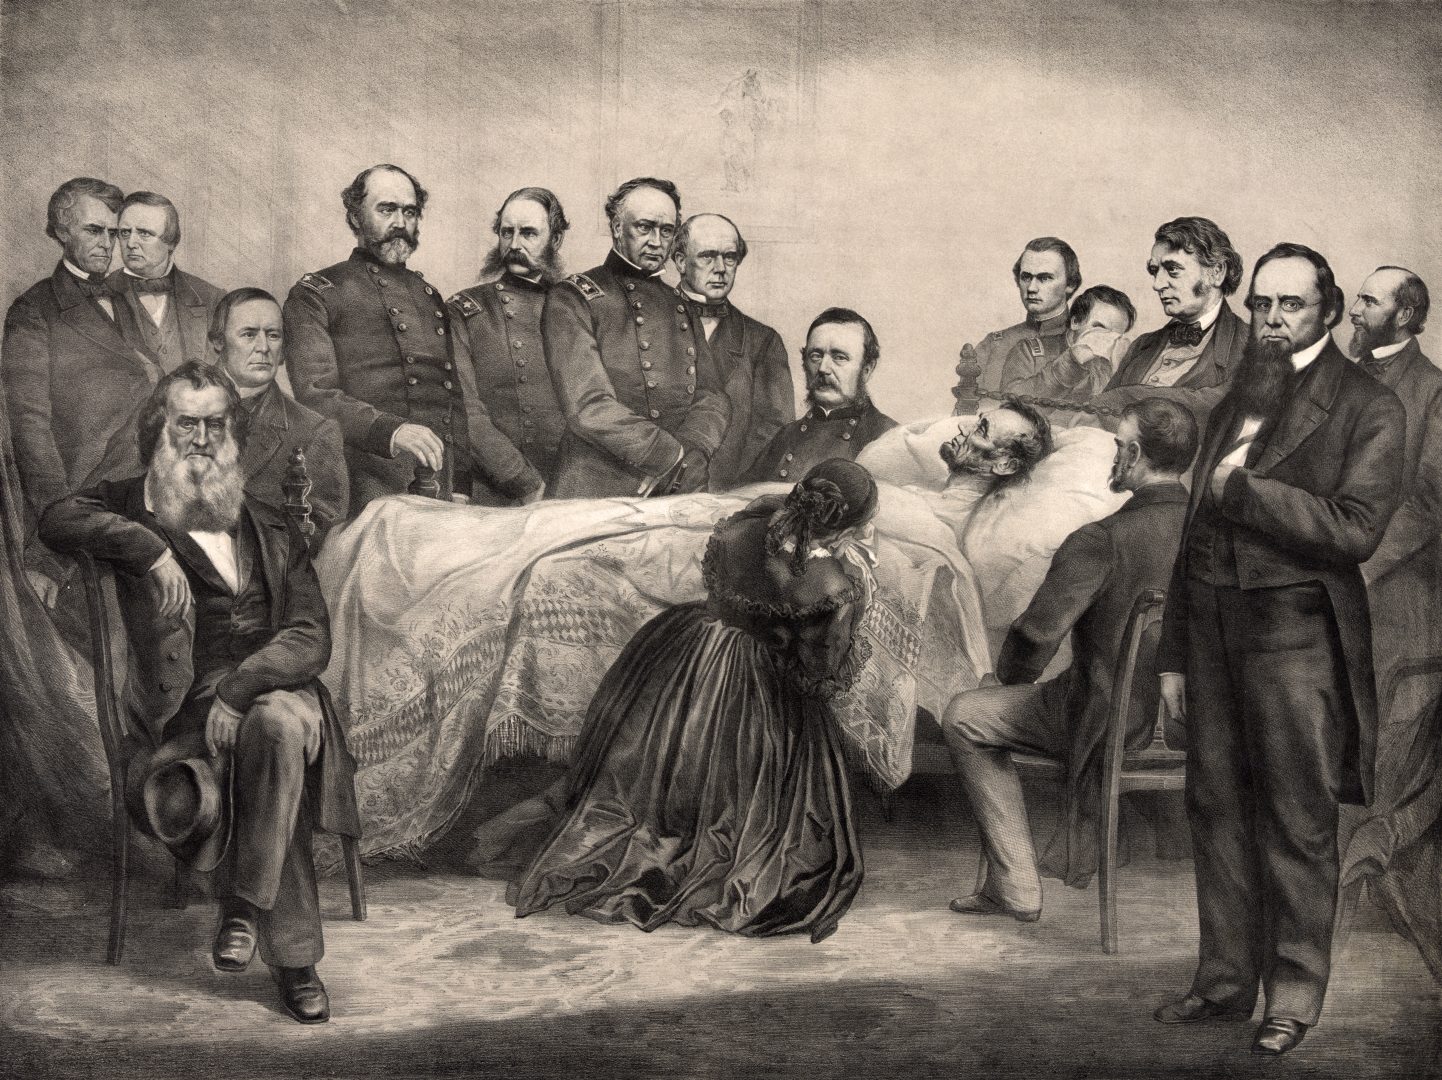 Vintage illustration features President Abraham Lincoln as he lay dying on his deathbed on April 15, 1865, the morning after he was shot in the head by a Confederate sympathizer while watching a play at Ford's Theatre in Washington, D.C. Lincoln died on April 15, 1865, at 7:22 am, aged 56.